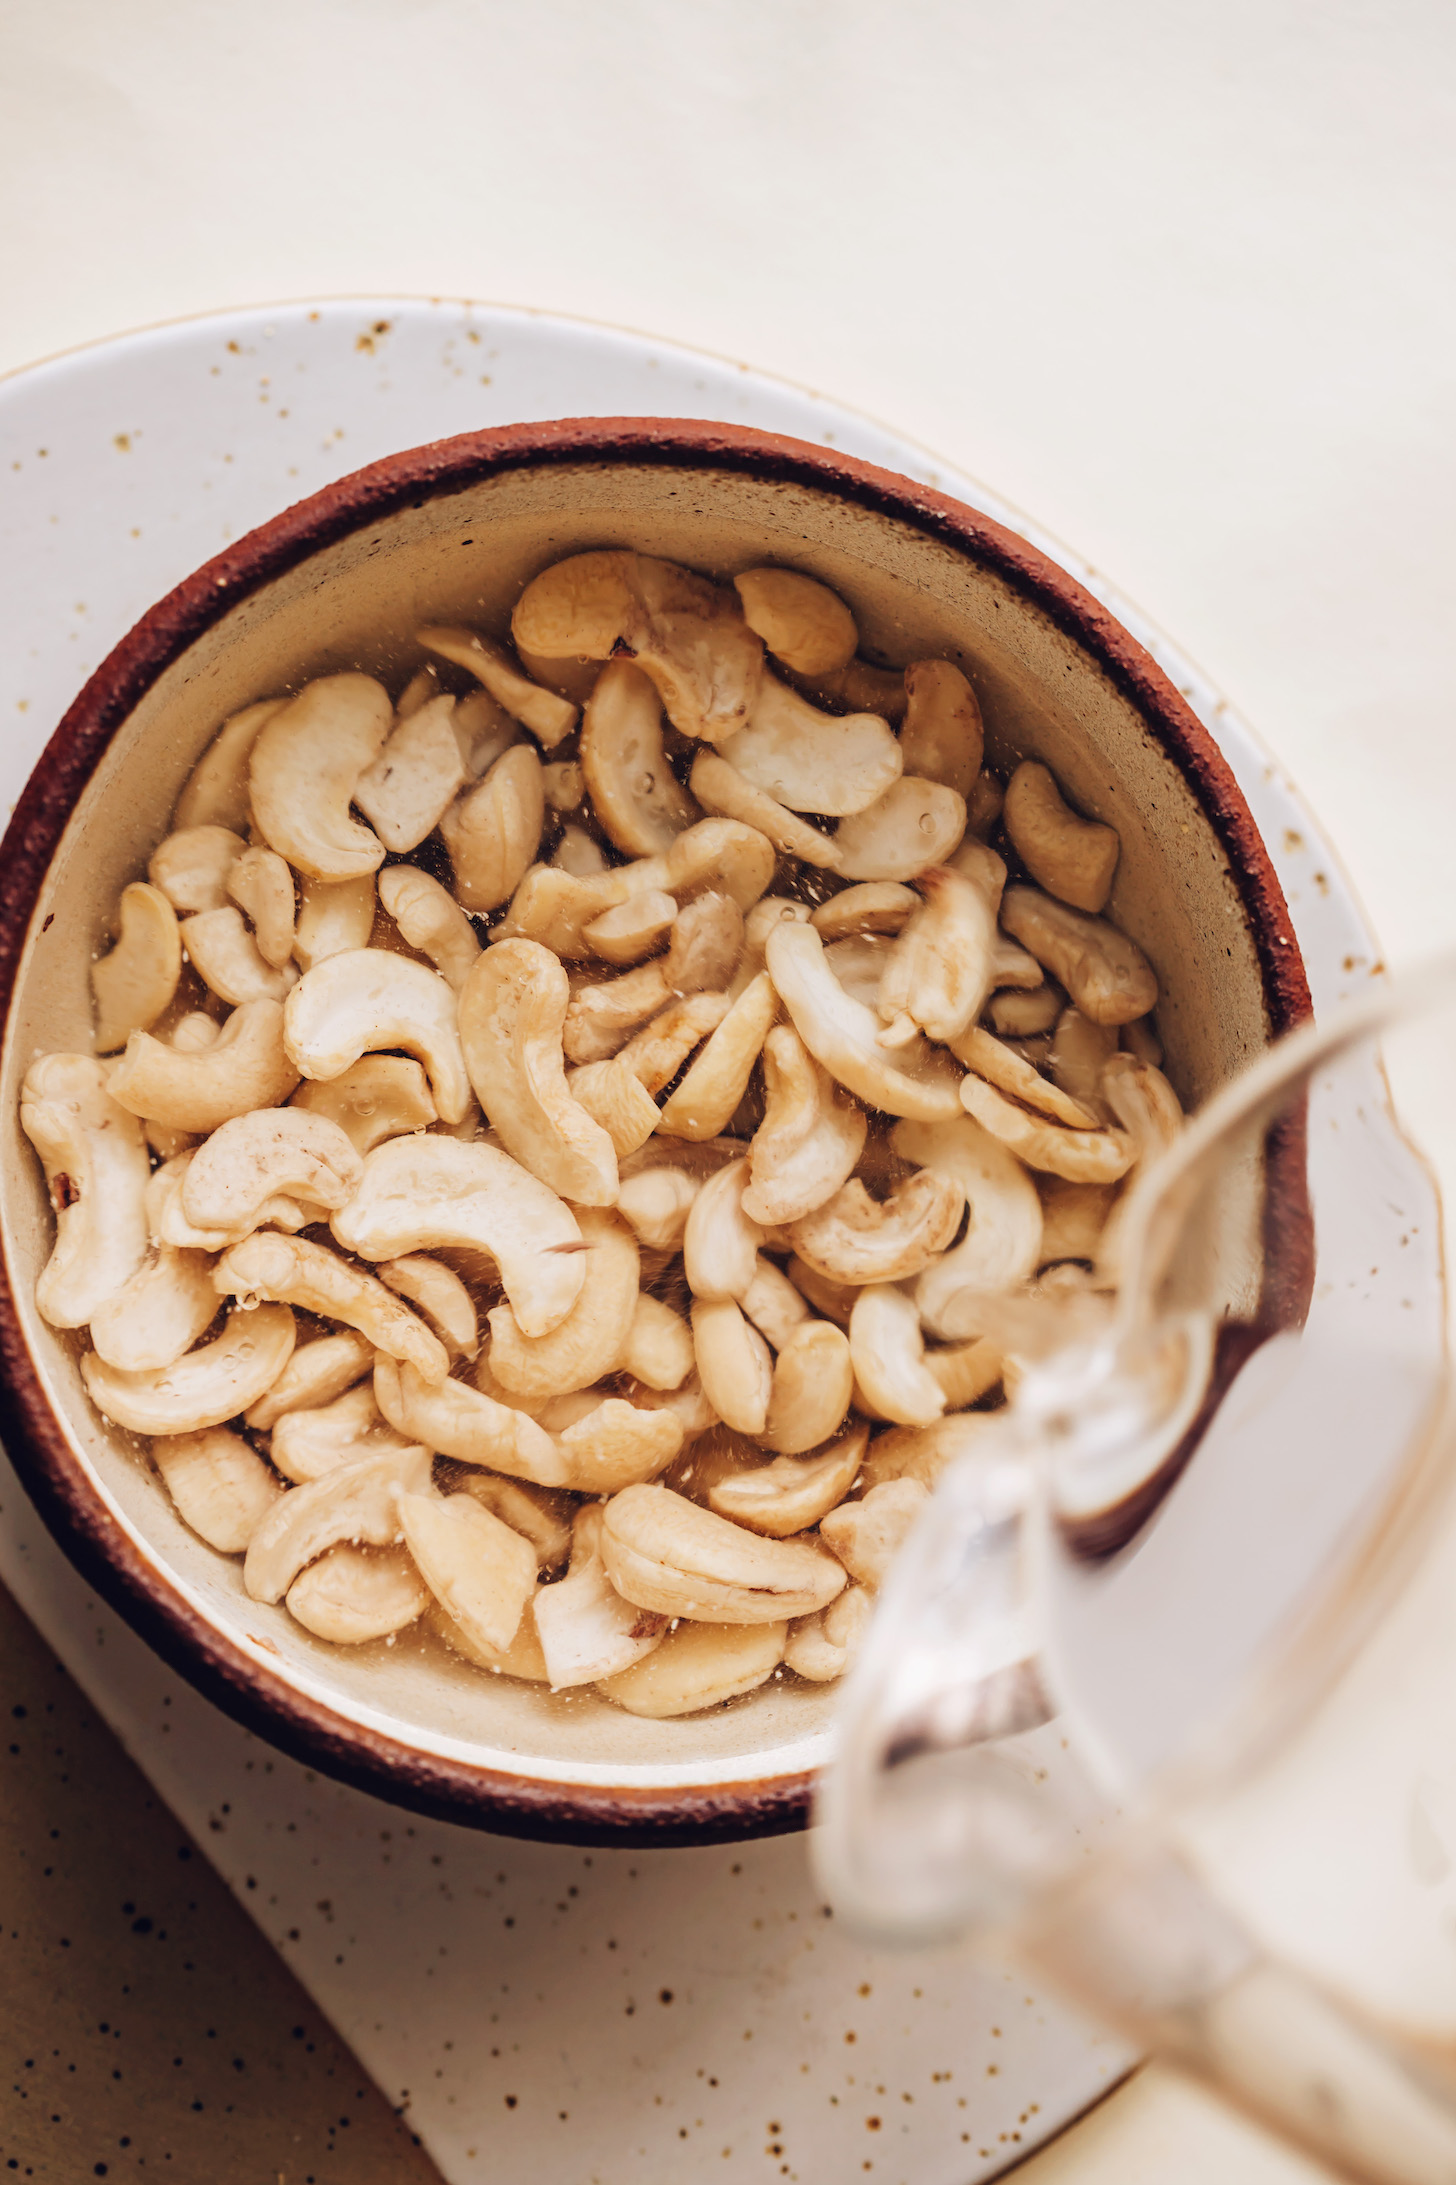 Pouring hot water over cashews to soak them